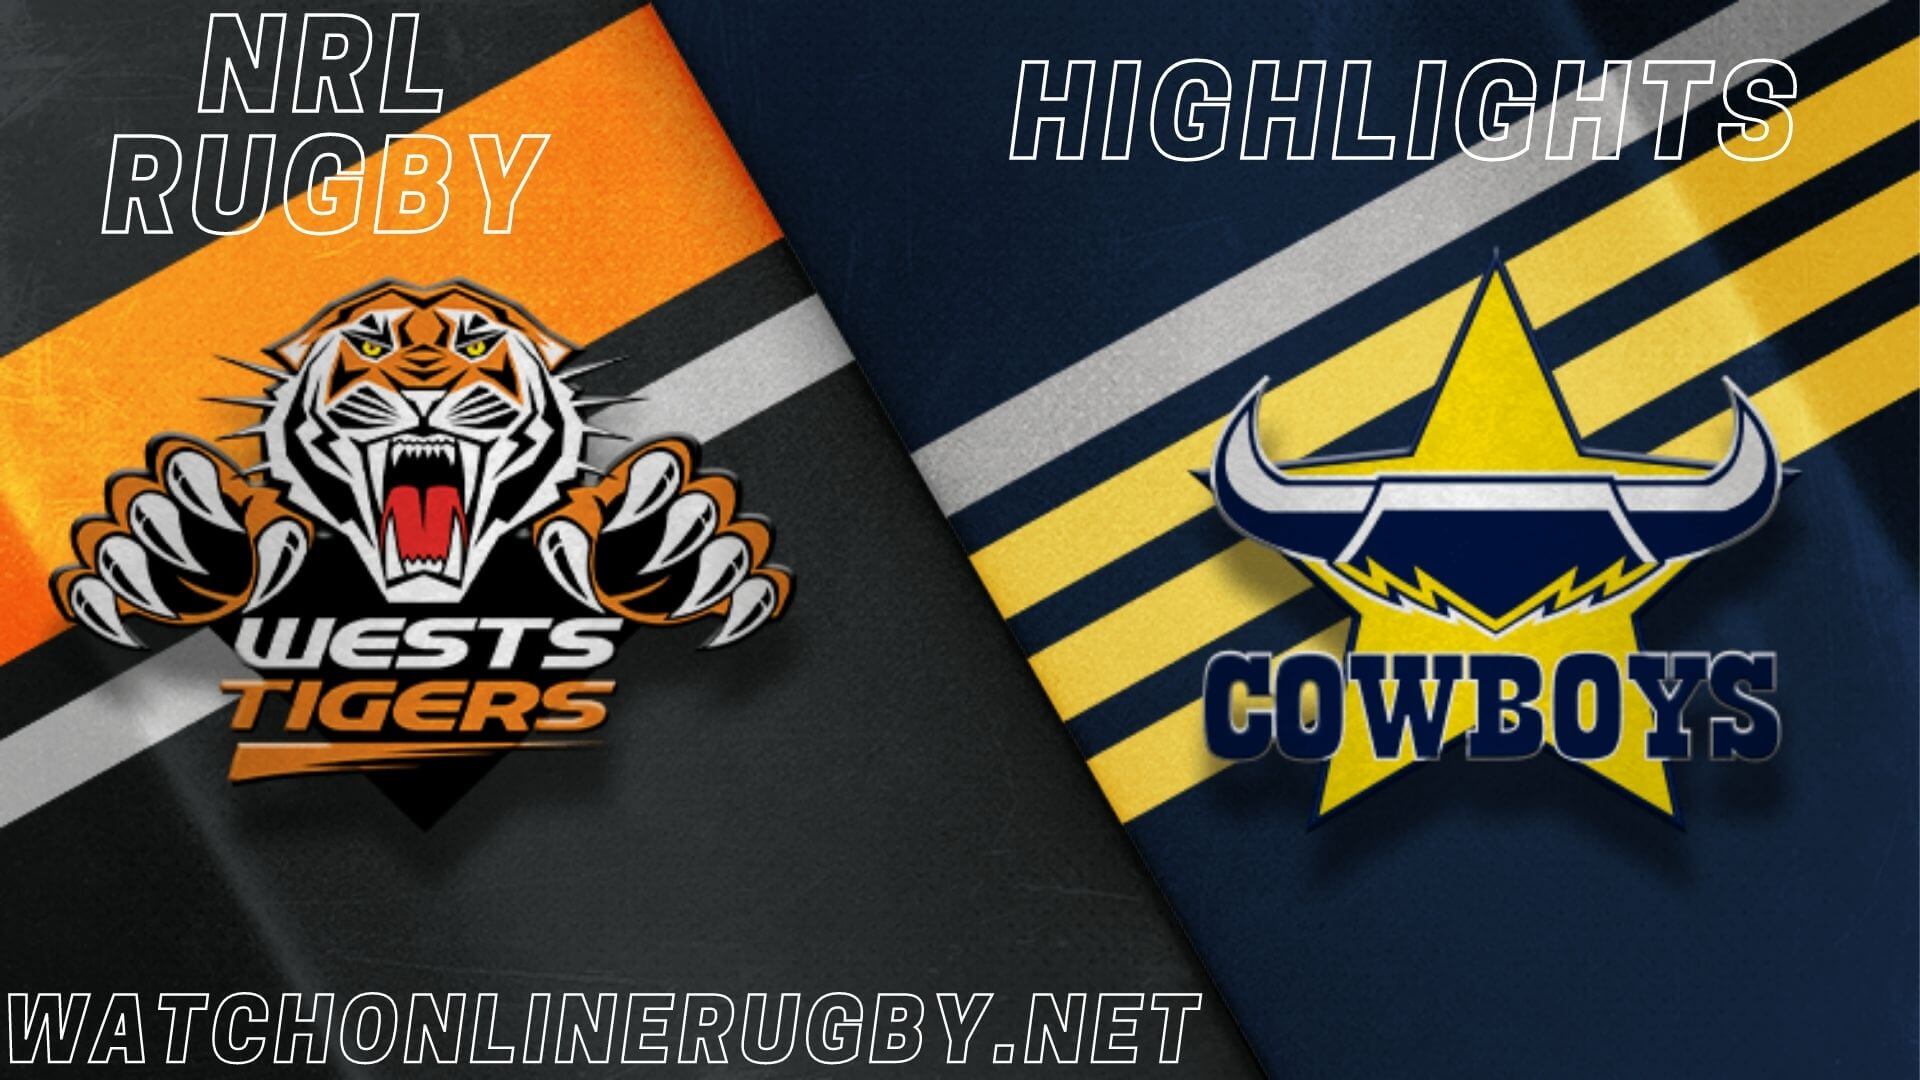 Wests Tigers Vs Cowboys Highlights RD 10 NRL Rugby